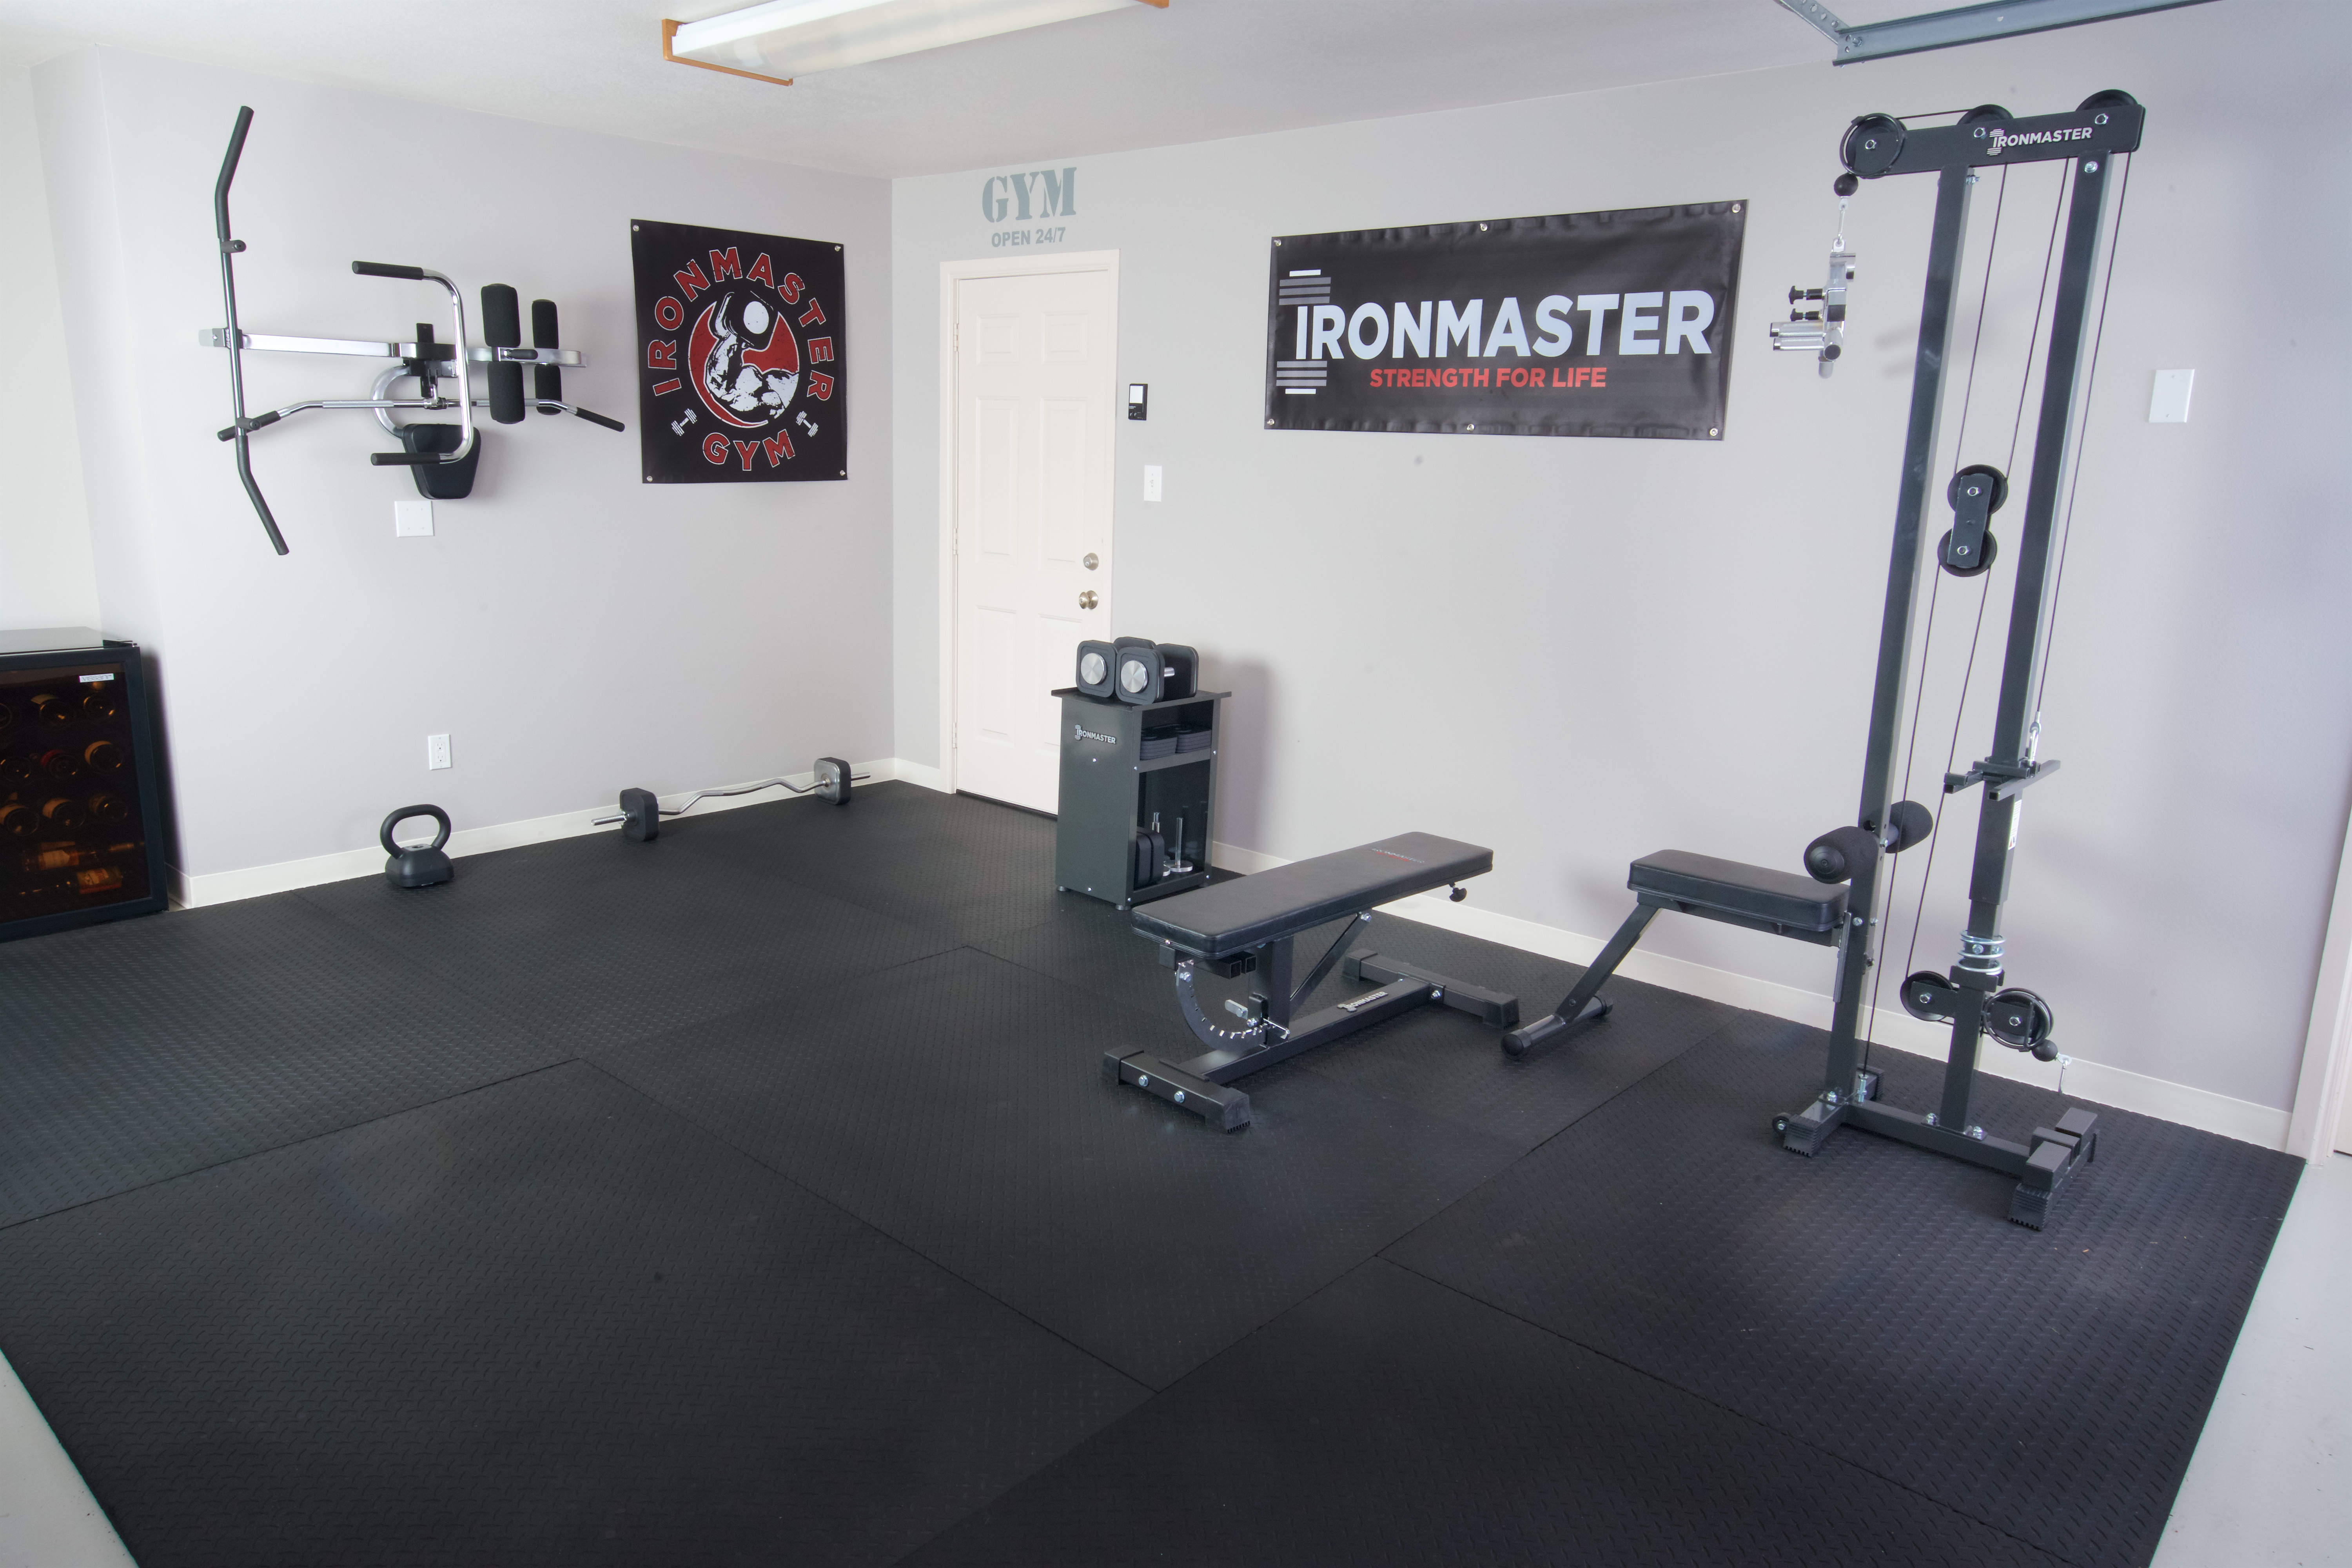 Fundamentals of resistance training, ironmaster home gym